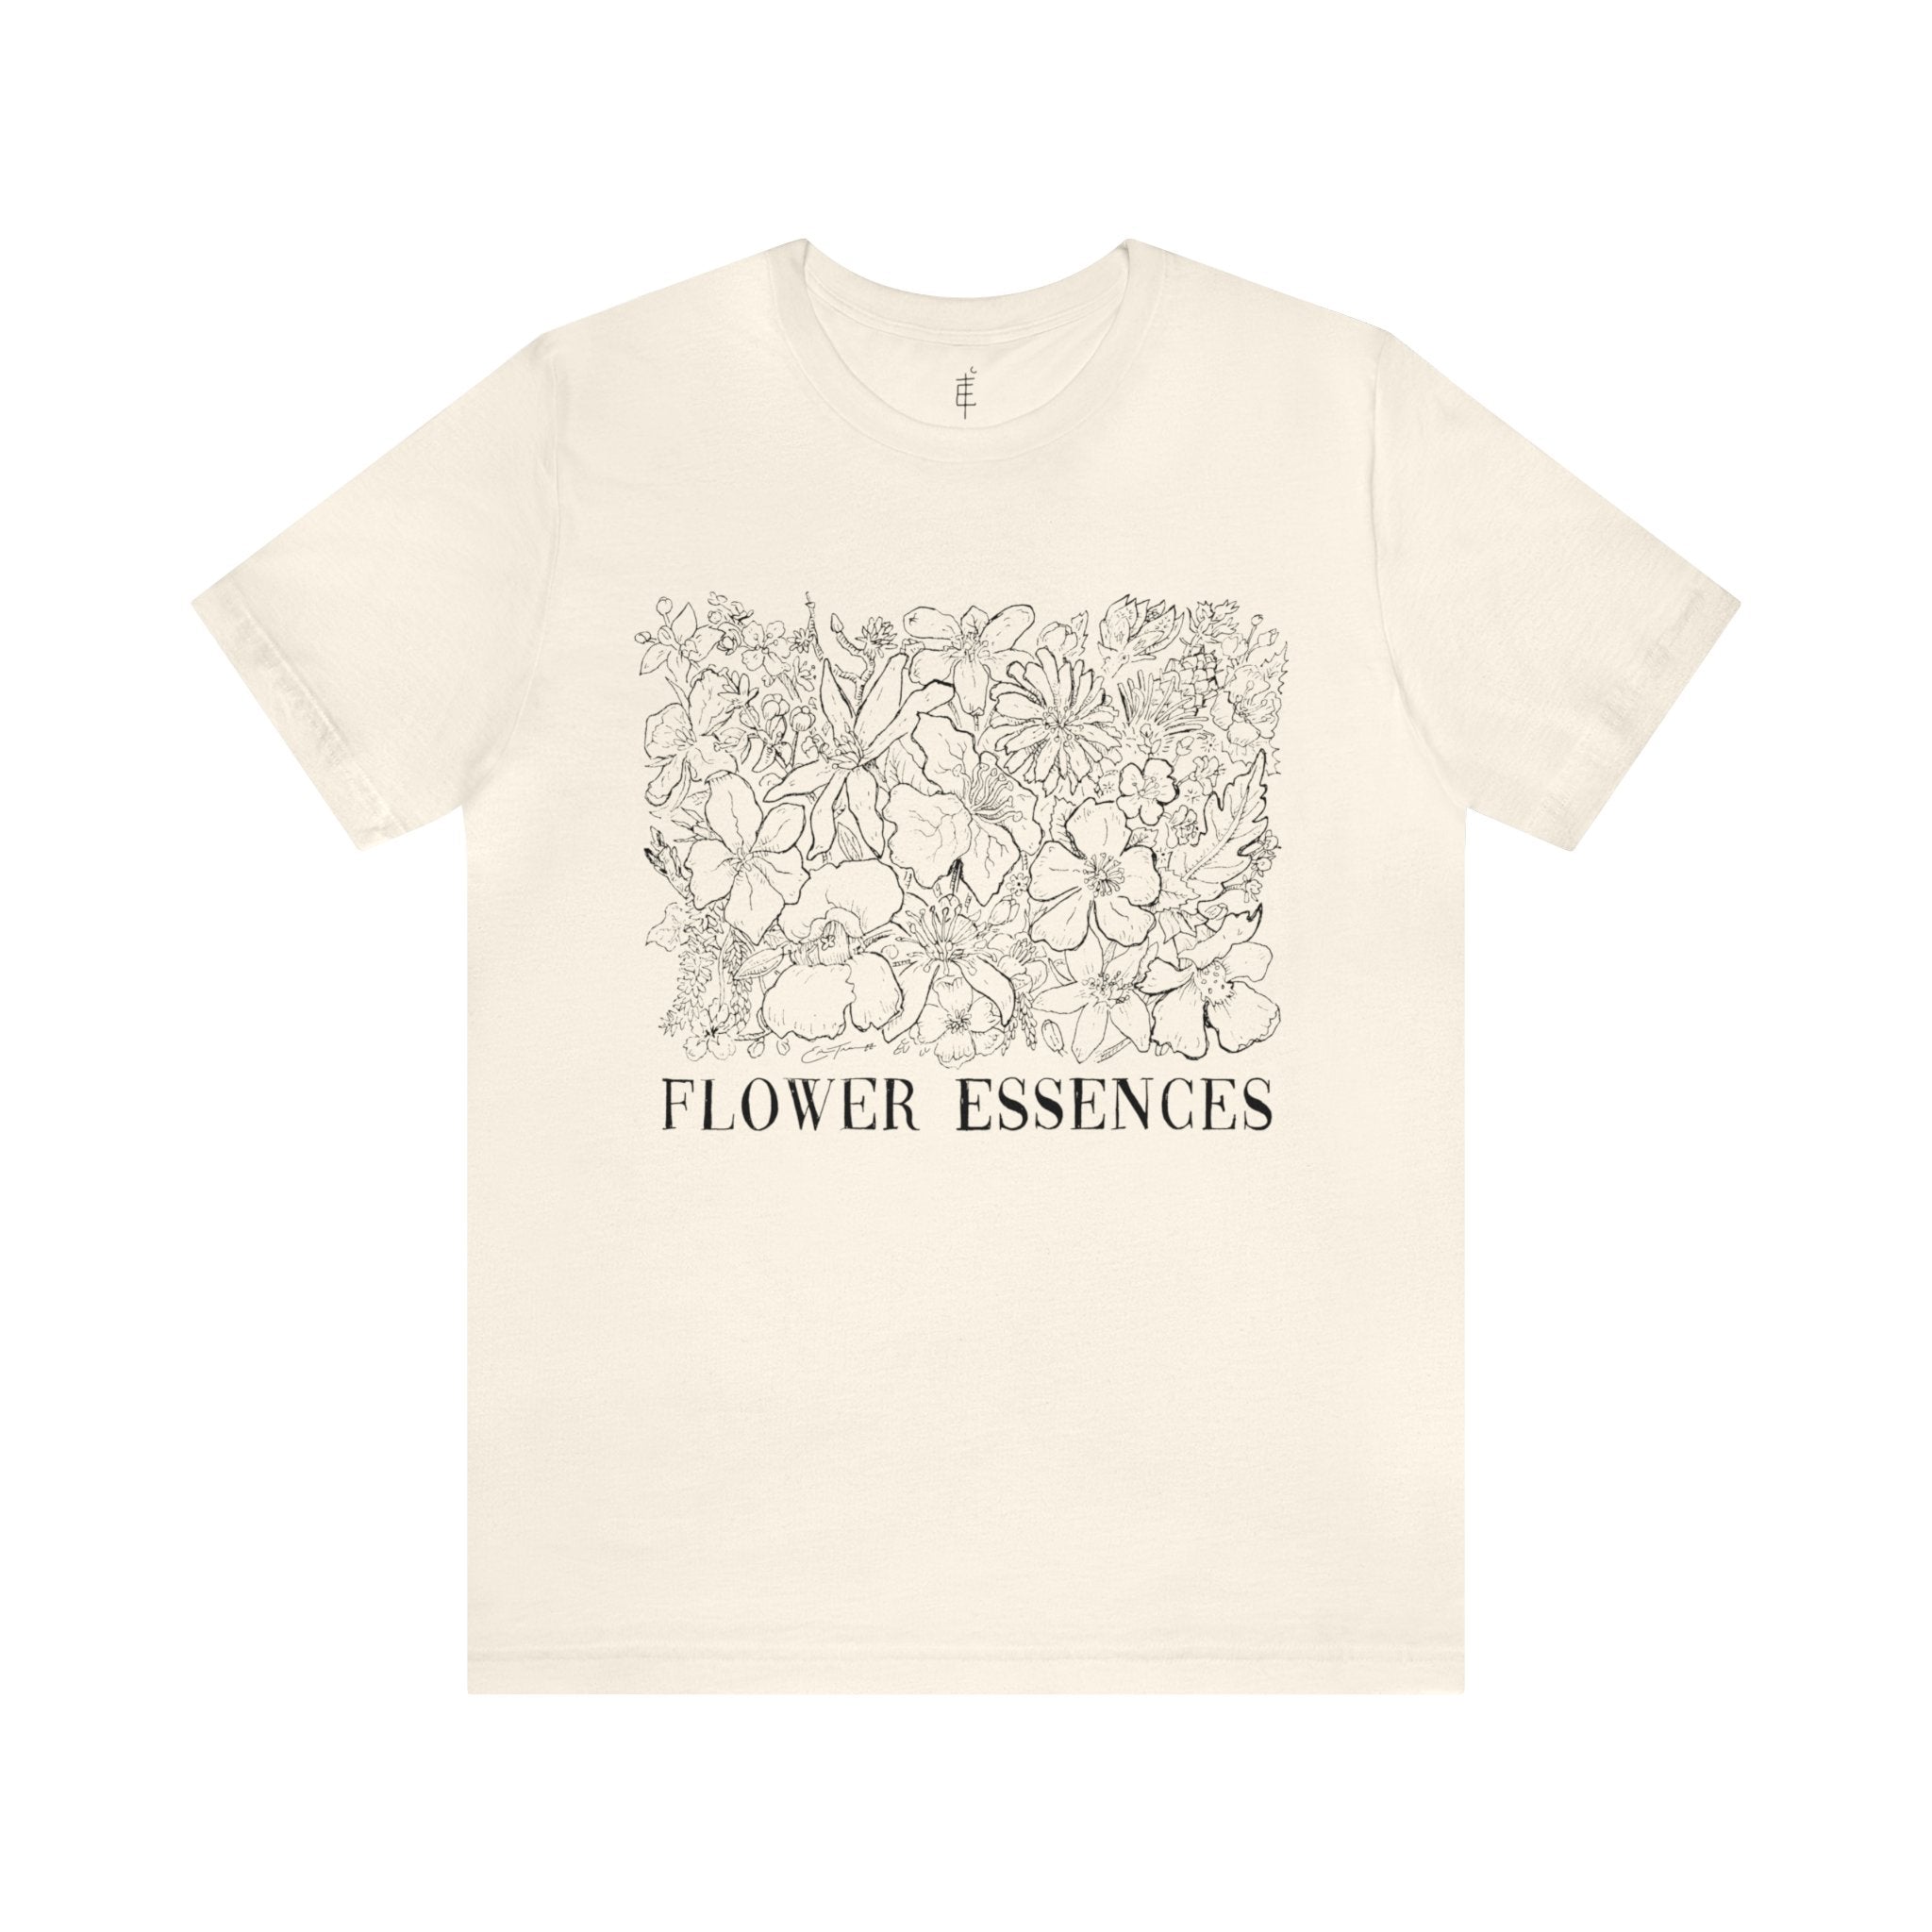 'Flower Essences' Tee by Eric Tecce